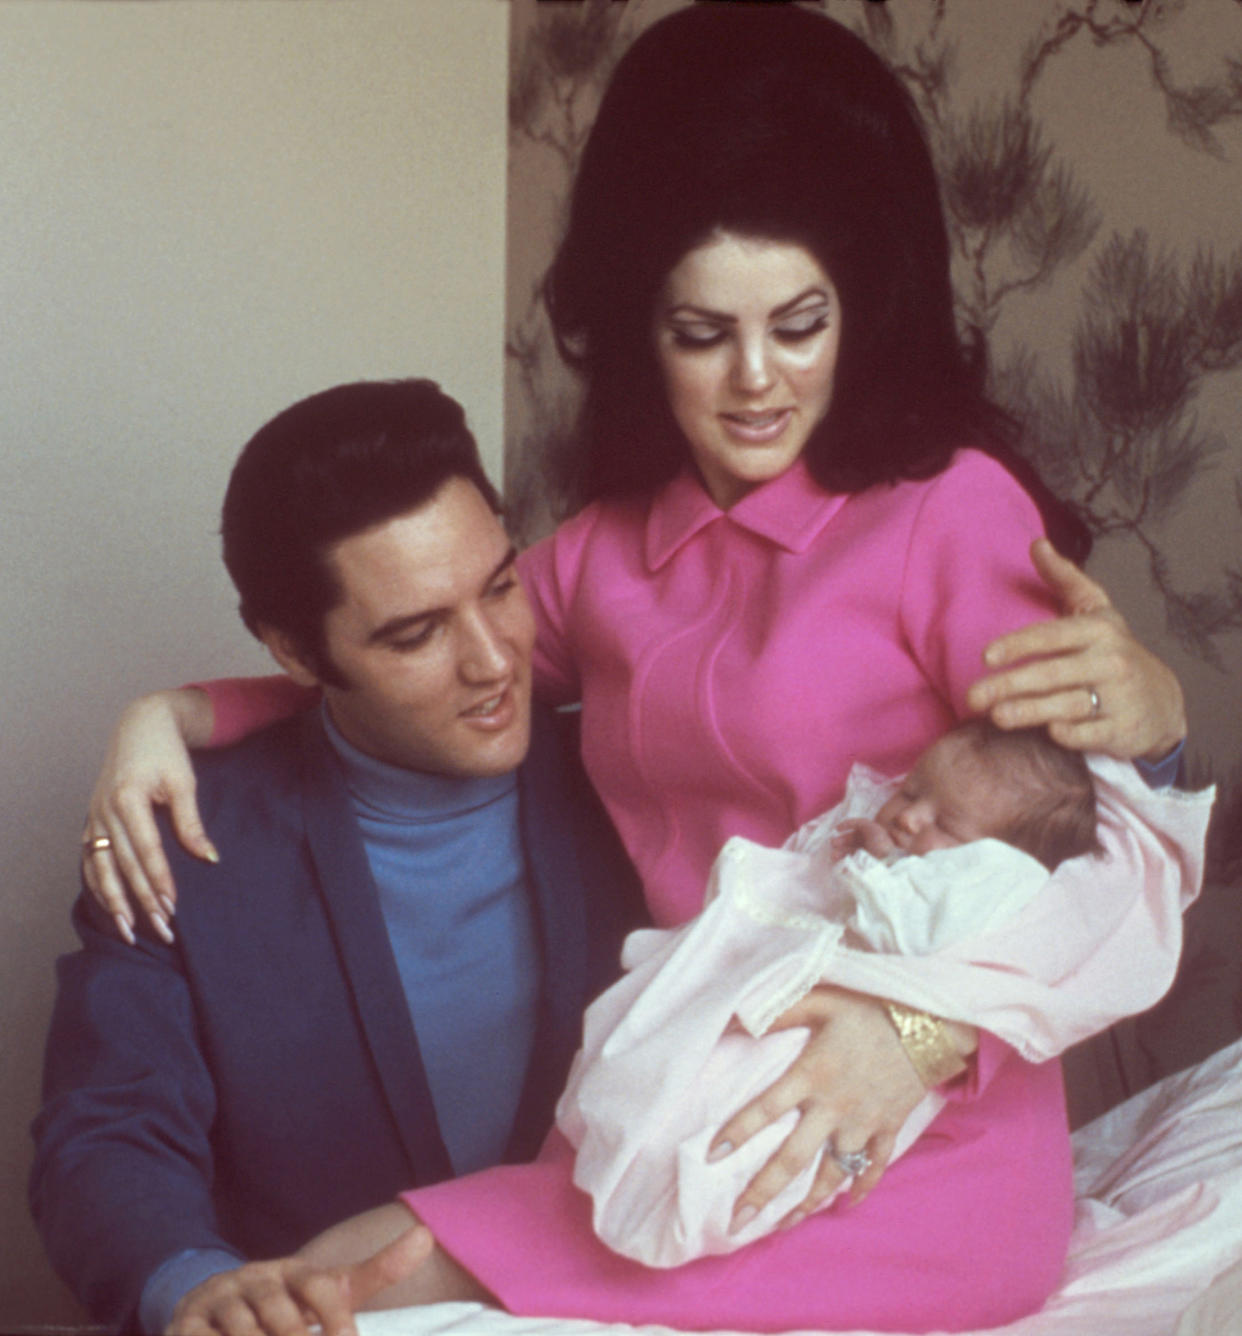 Elvis and Priscilla Presley cradled their newborn daughter, Lisa Marie, in February 1968. (Michael Ochs Archives / Getty Images)